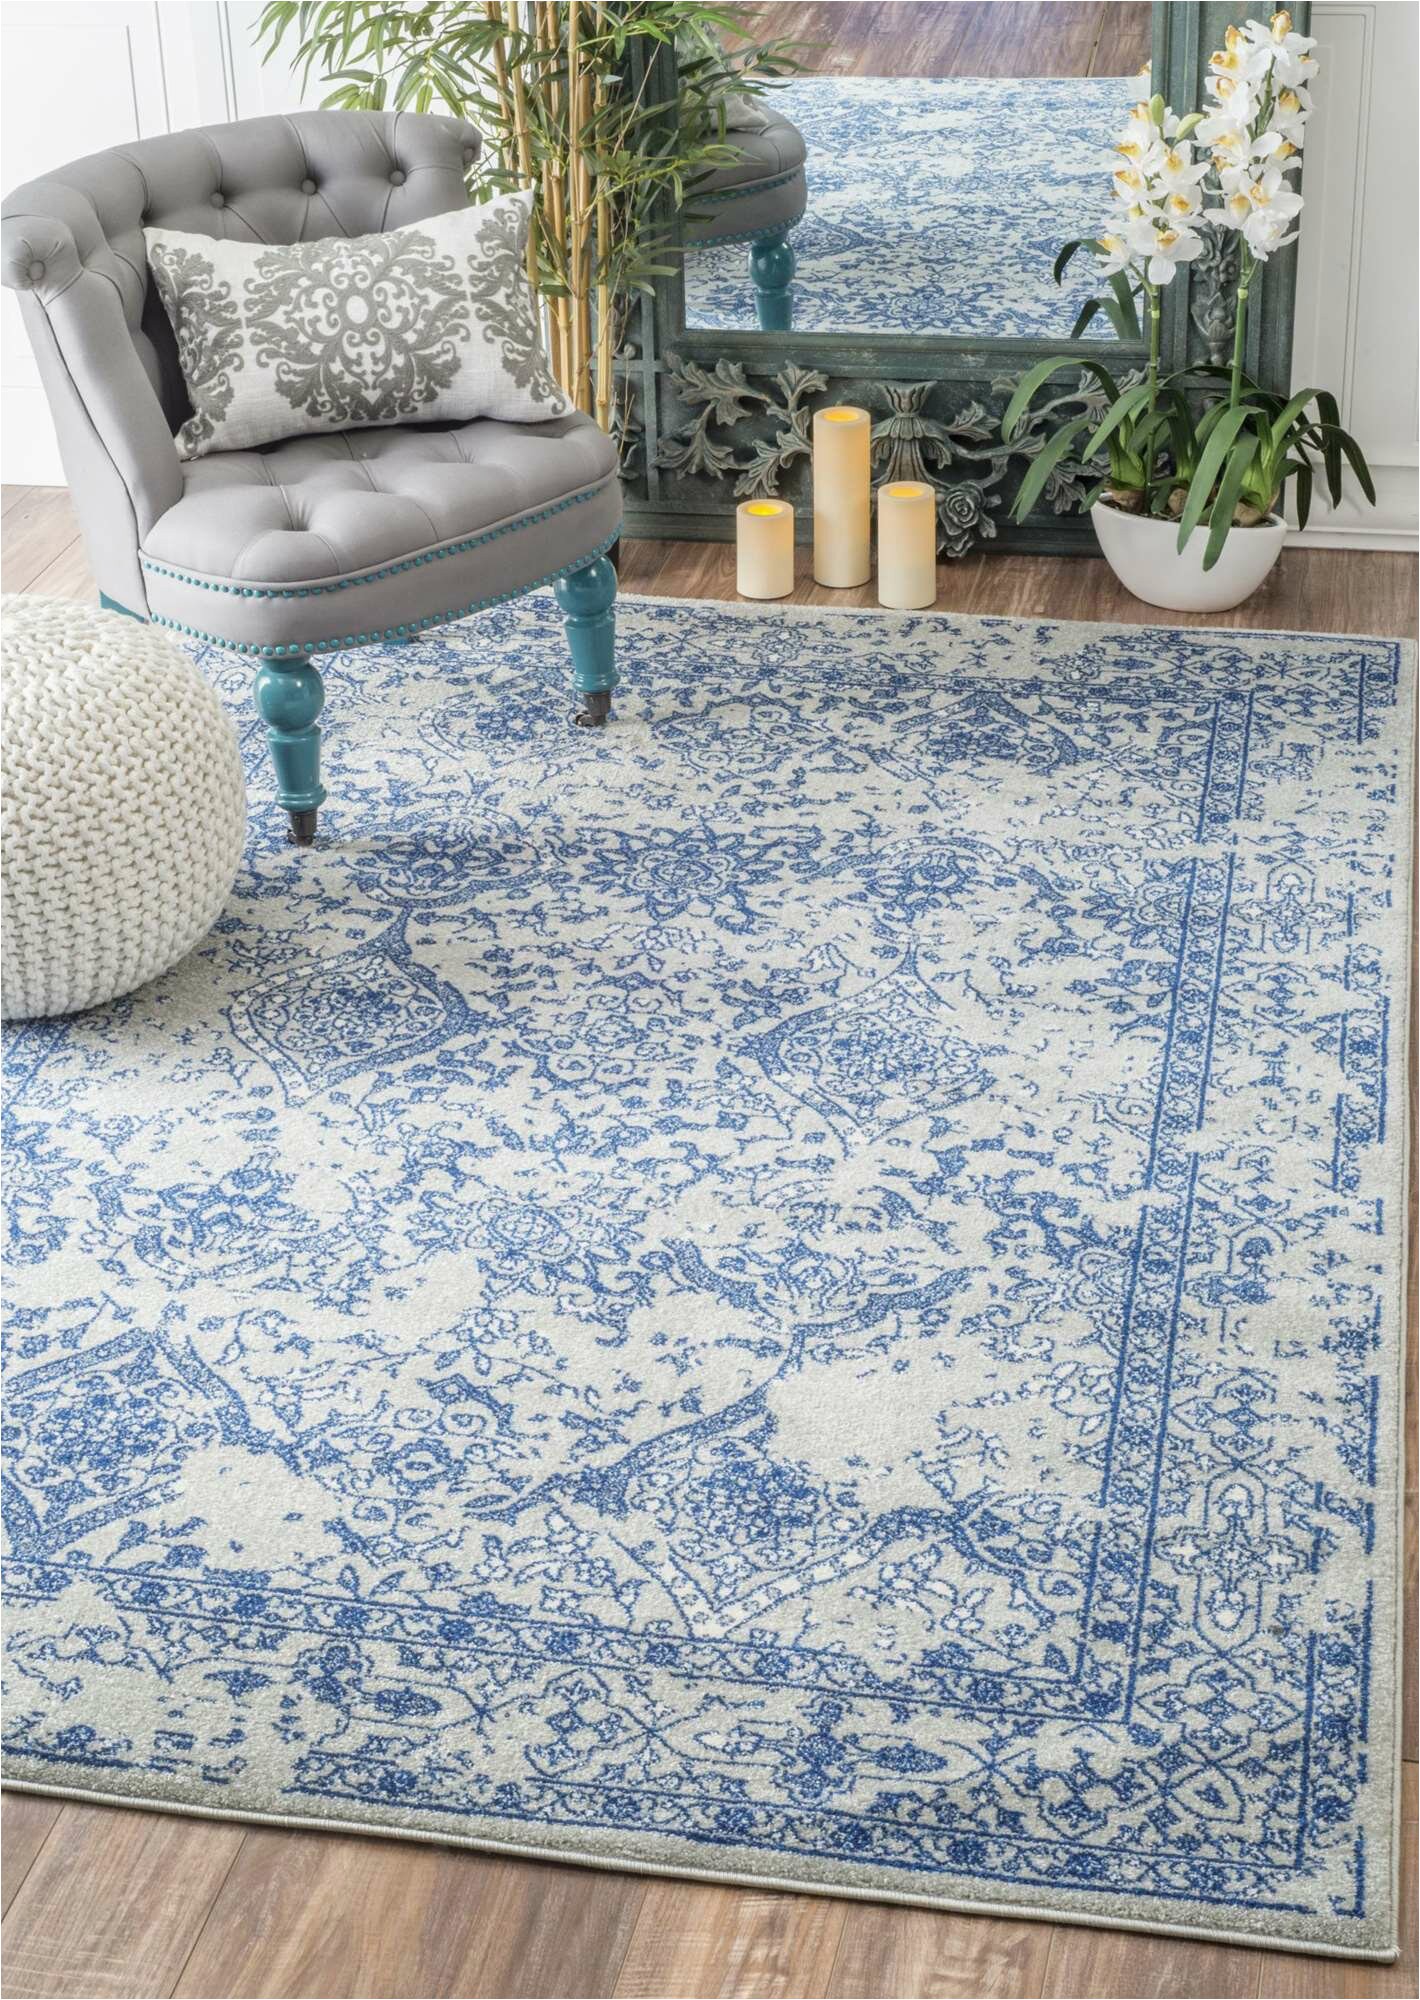 Blue and White Chinoiserie Rug Grady Light Blue area Rug